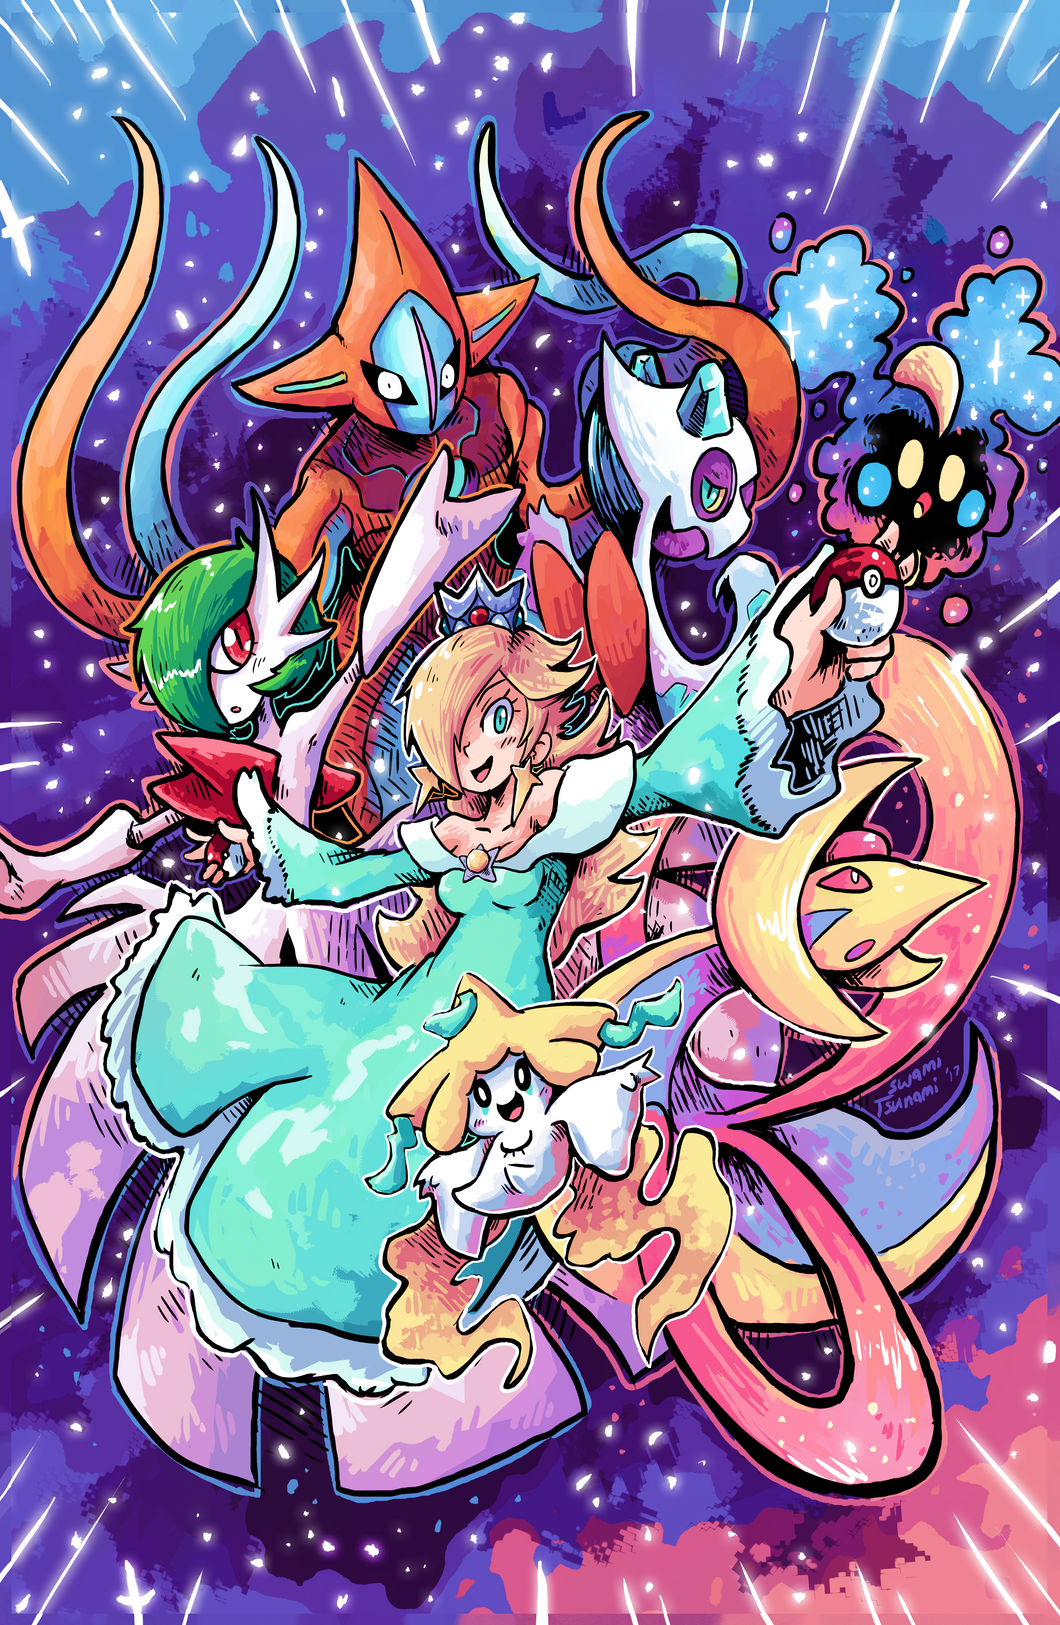 Rosalina and Her Team - 11 x 17 Poster Print